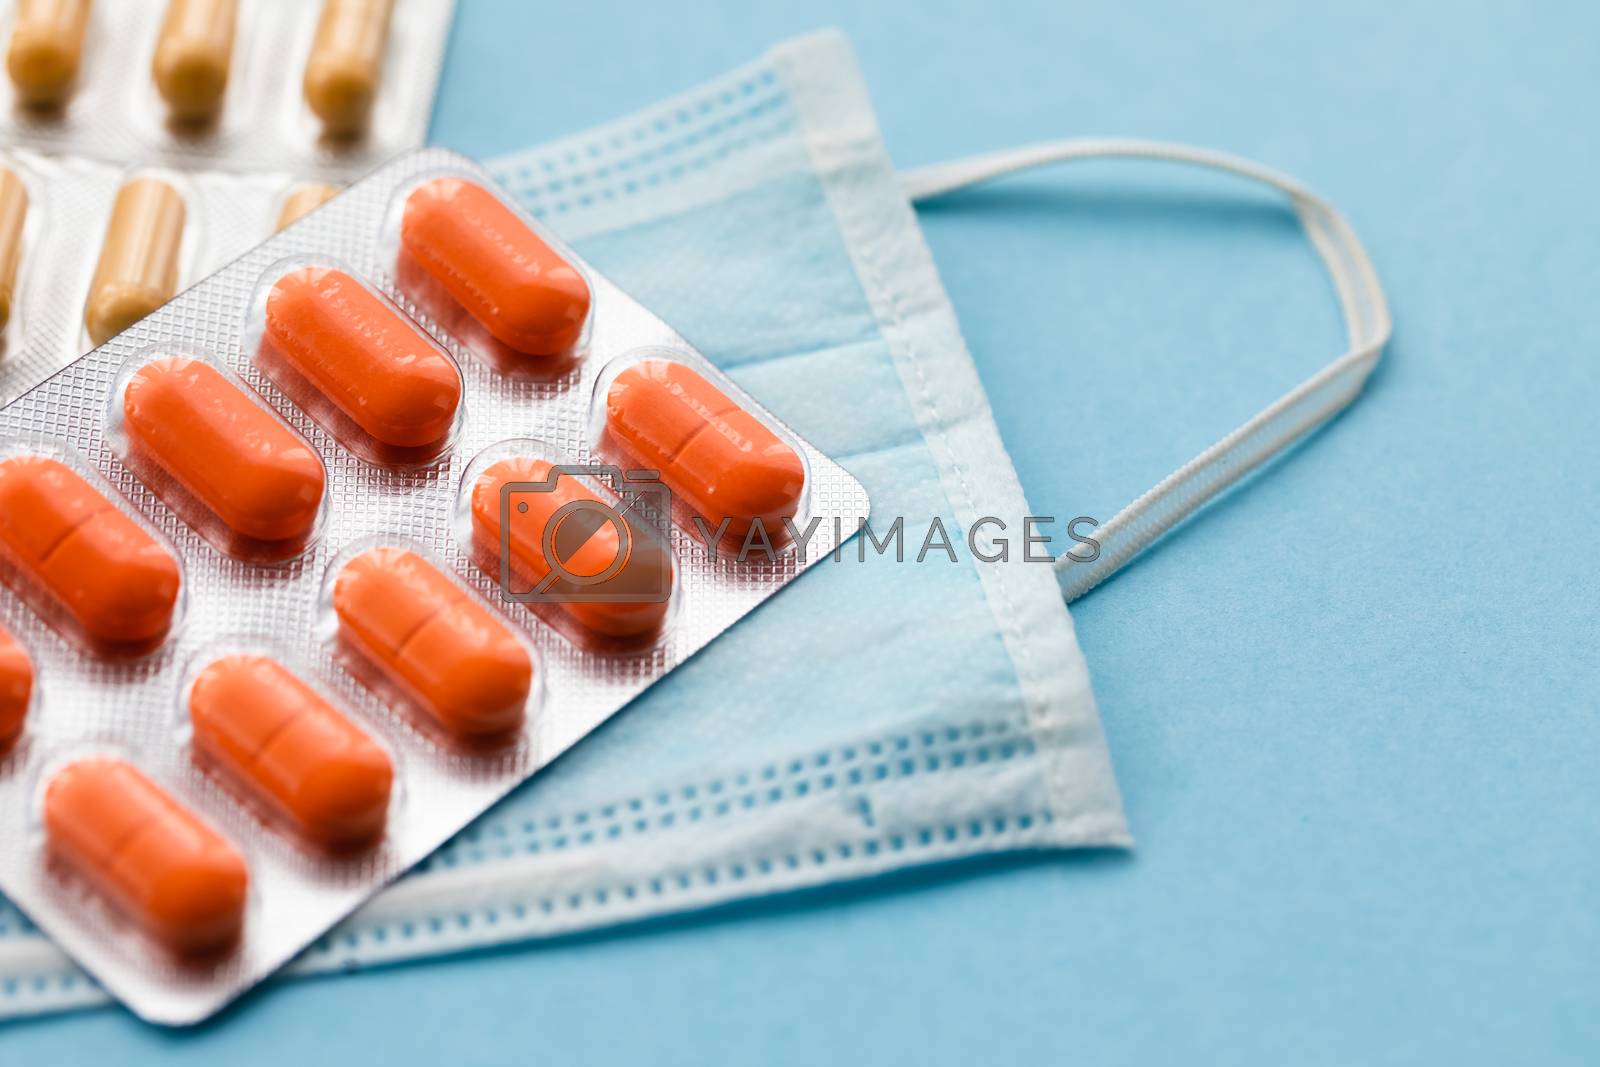 Royalty free image of Tablets and pills on blue background with surgical protective mask, medicine drugs concept by Katia1504